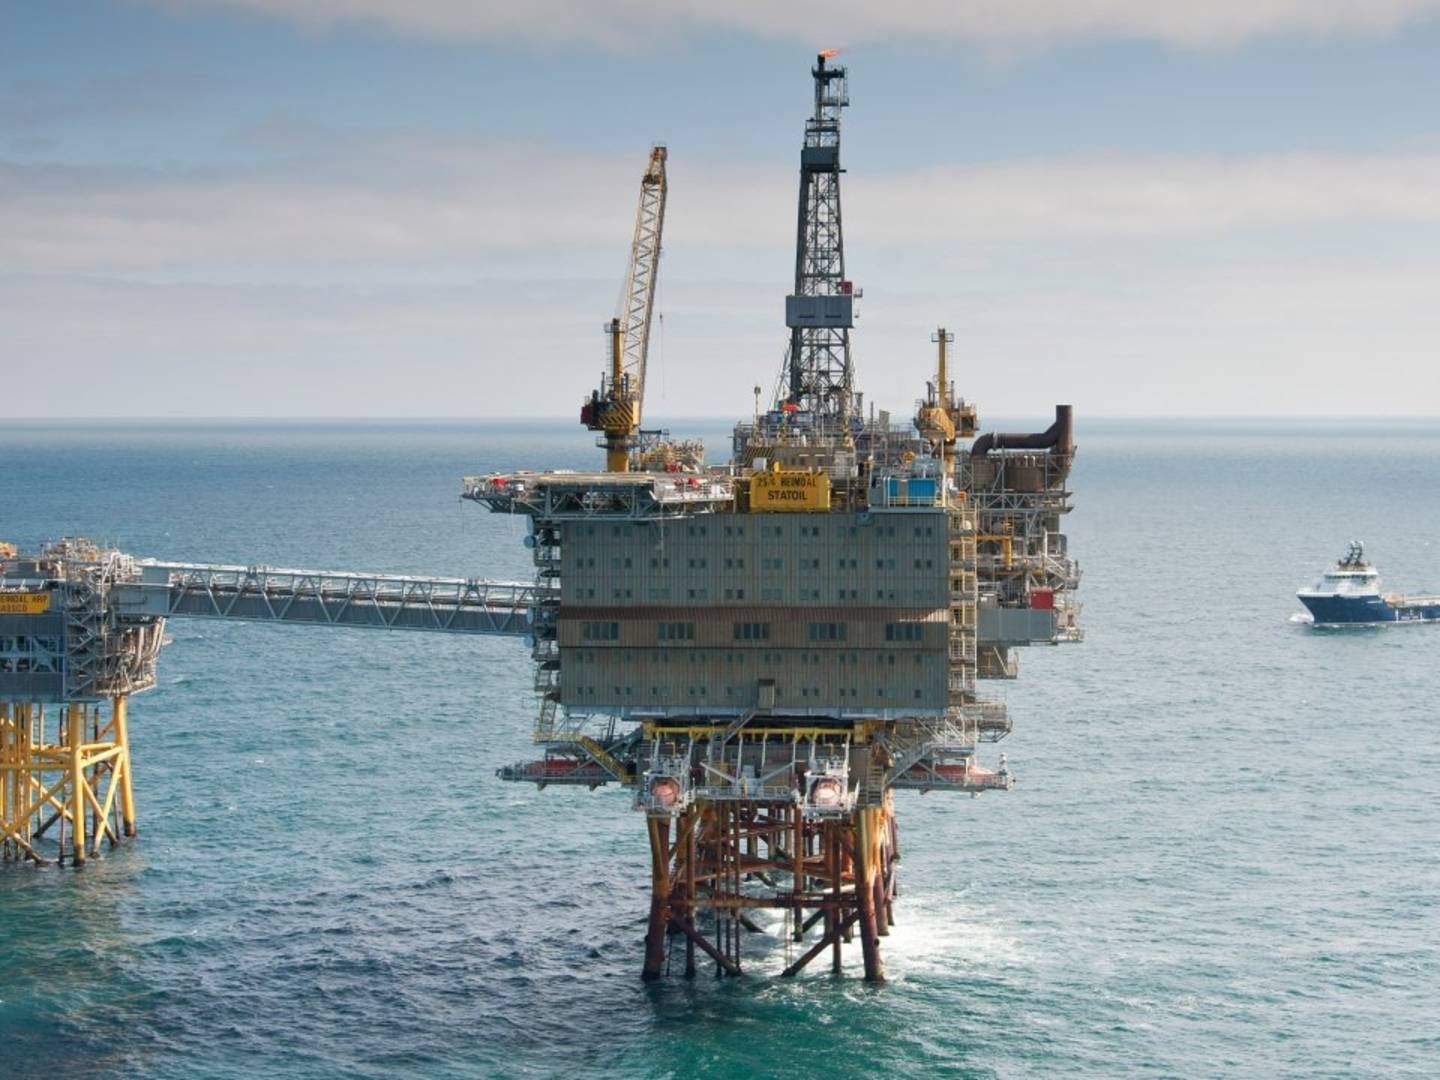 Two people were injured in November when an explosion occurred on the Heimdal platform in the Norwegian sector. And there were unfortunately more of those kinds of accidents last year than in 2018. | Photo: Equinor